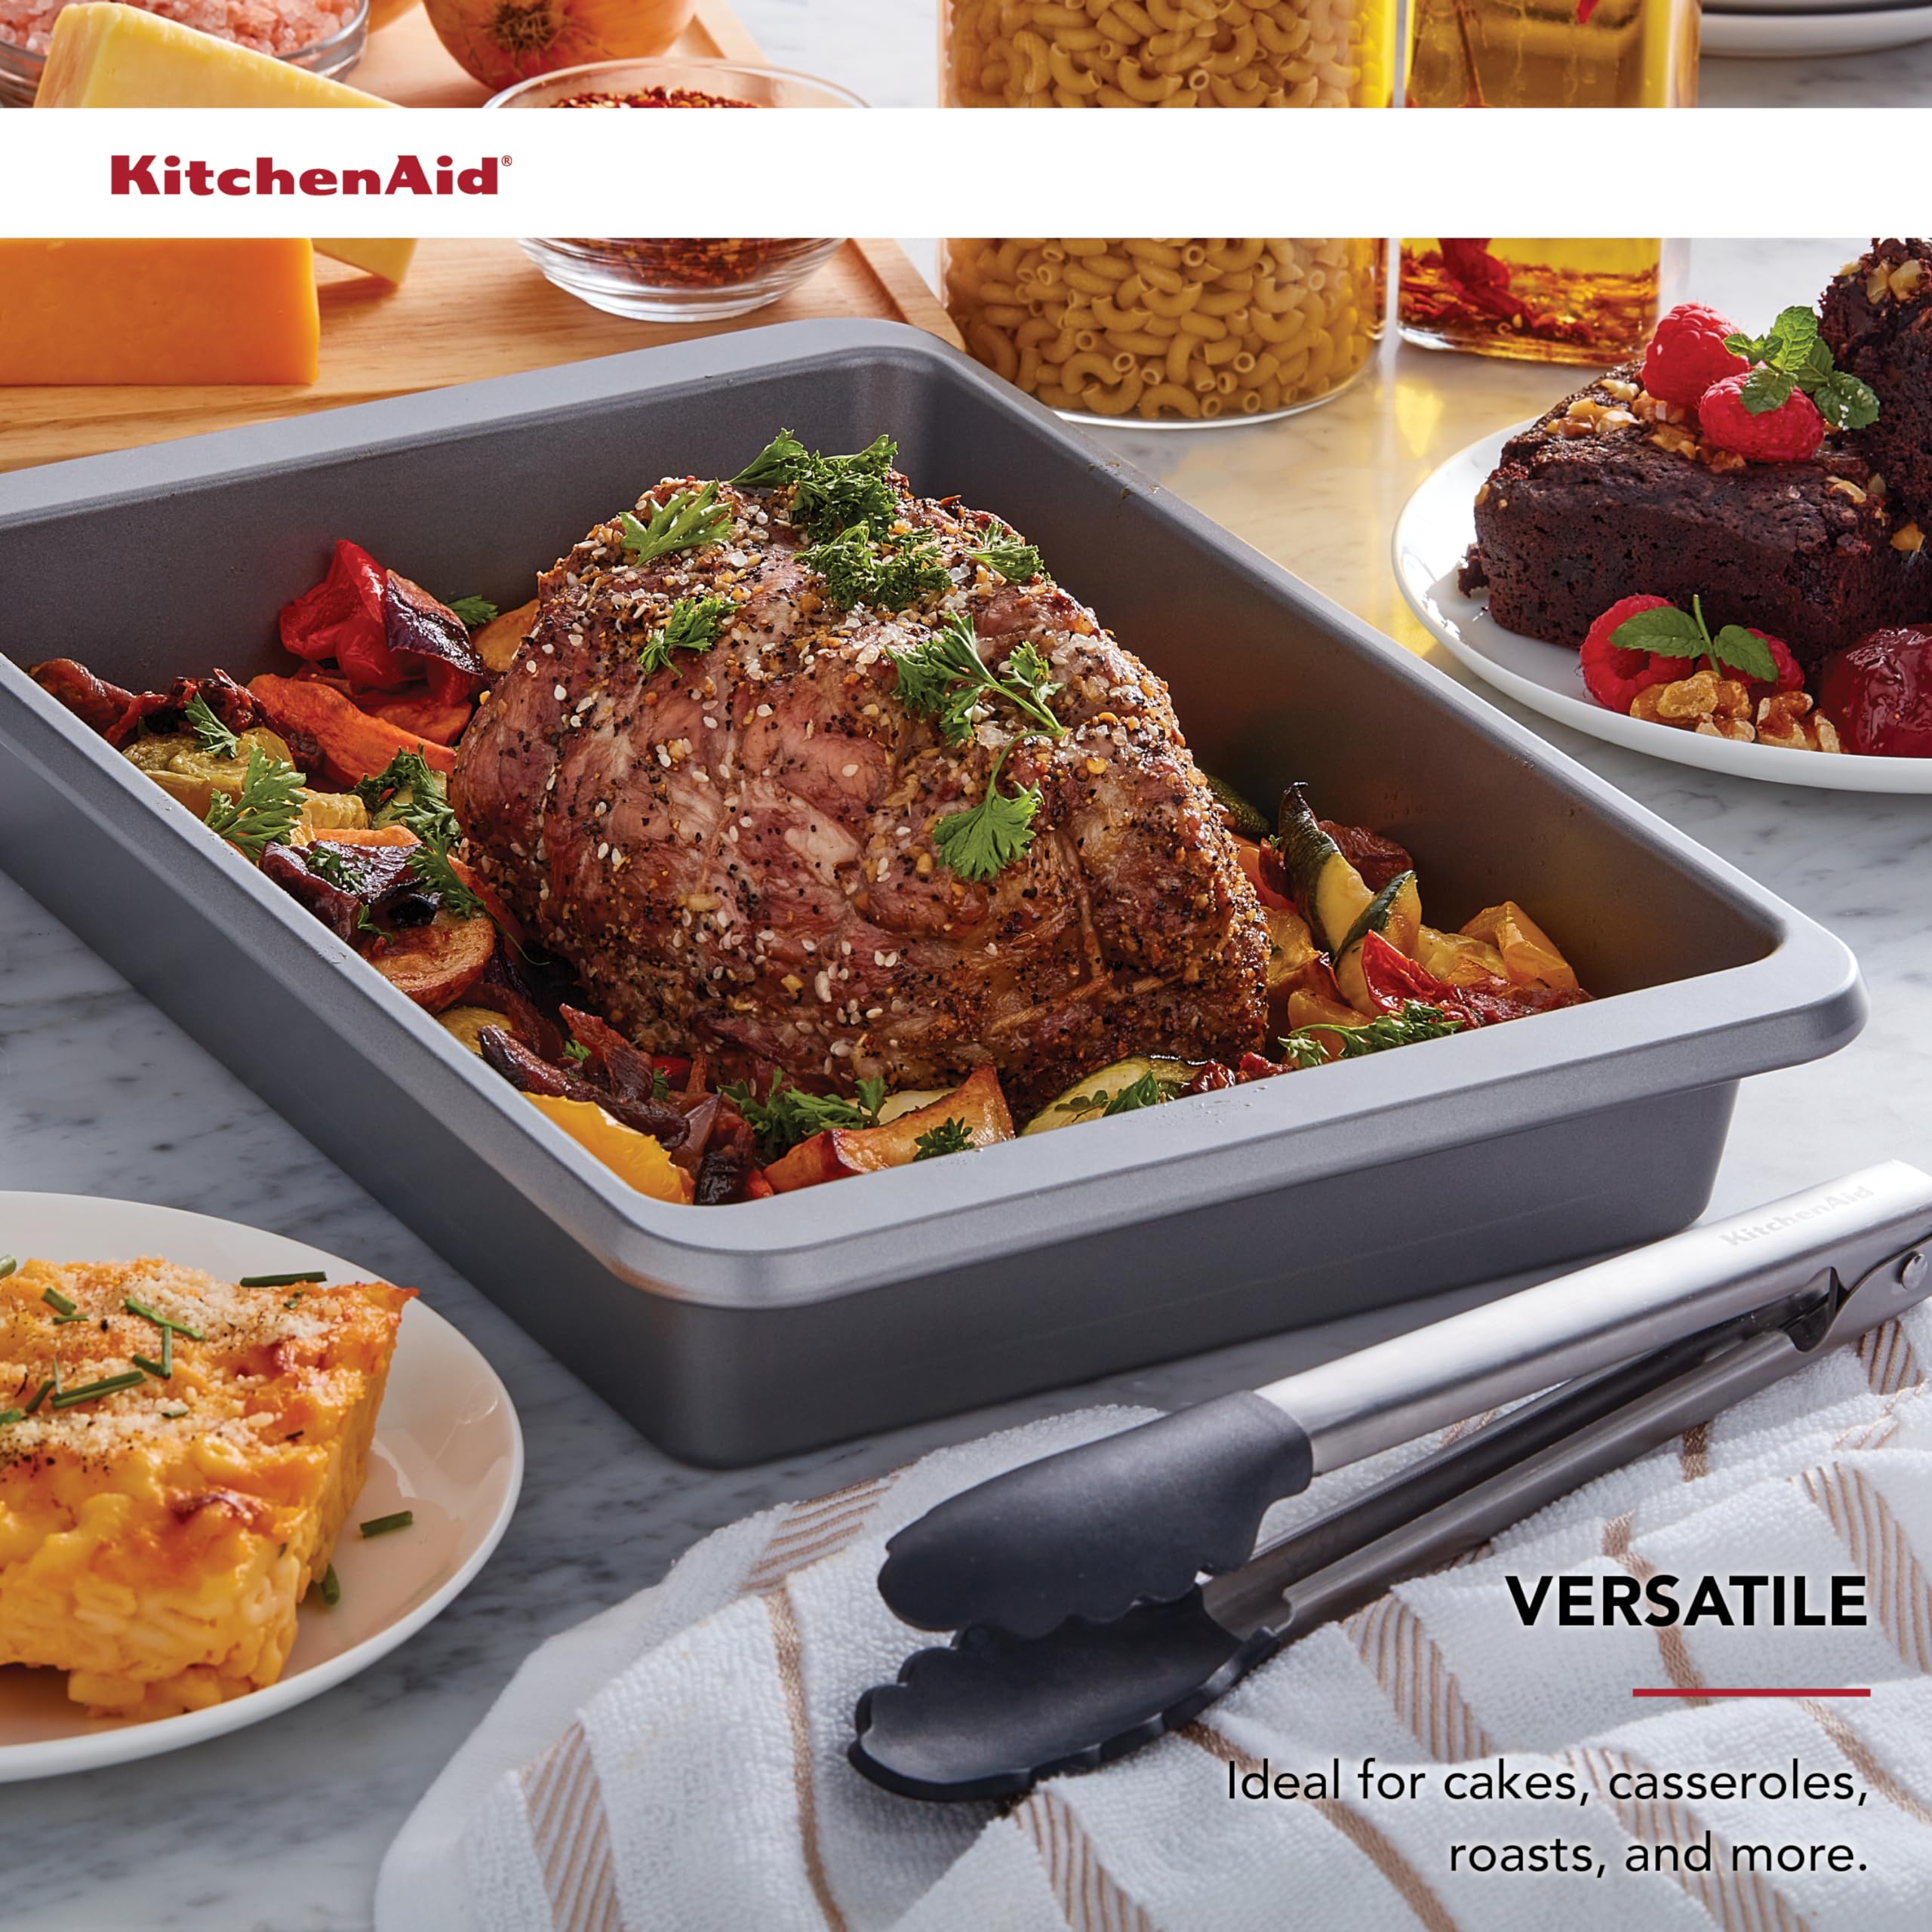 KitchenAid Nonstick 9x 13 in Cake Pan with Extended Handles for Easy Grip, Aluminized Steel to Promoted Even Baking, Dishwasher Safe,Contour Silver